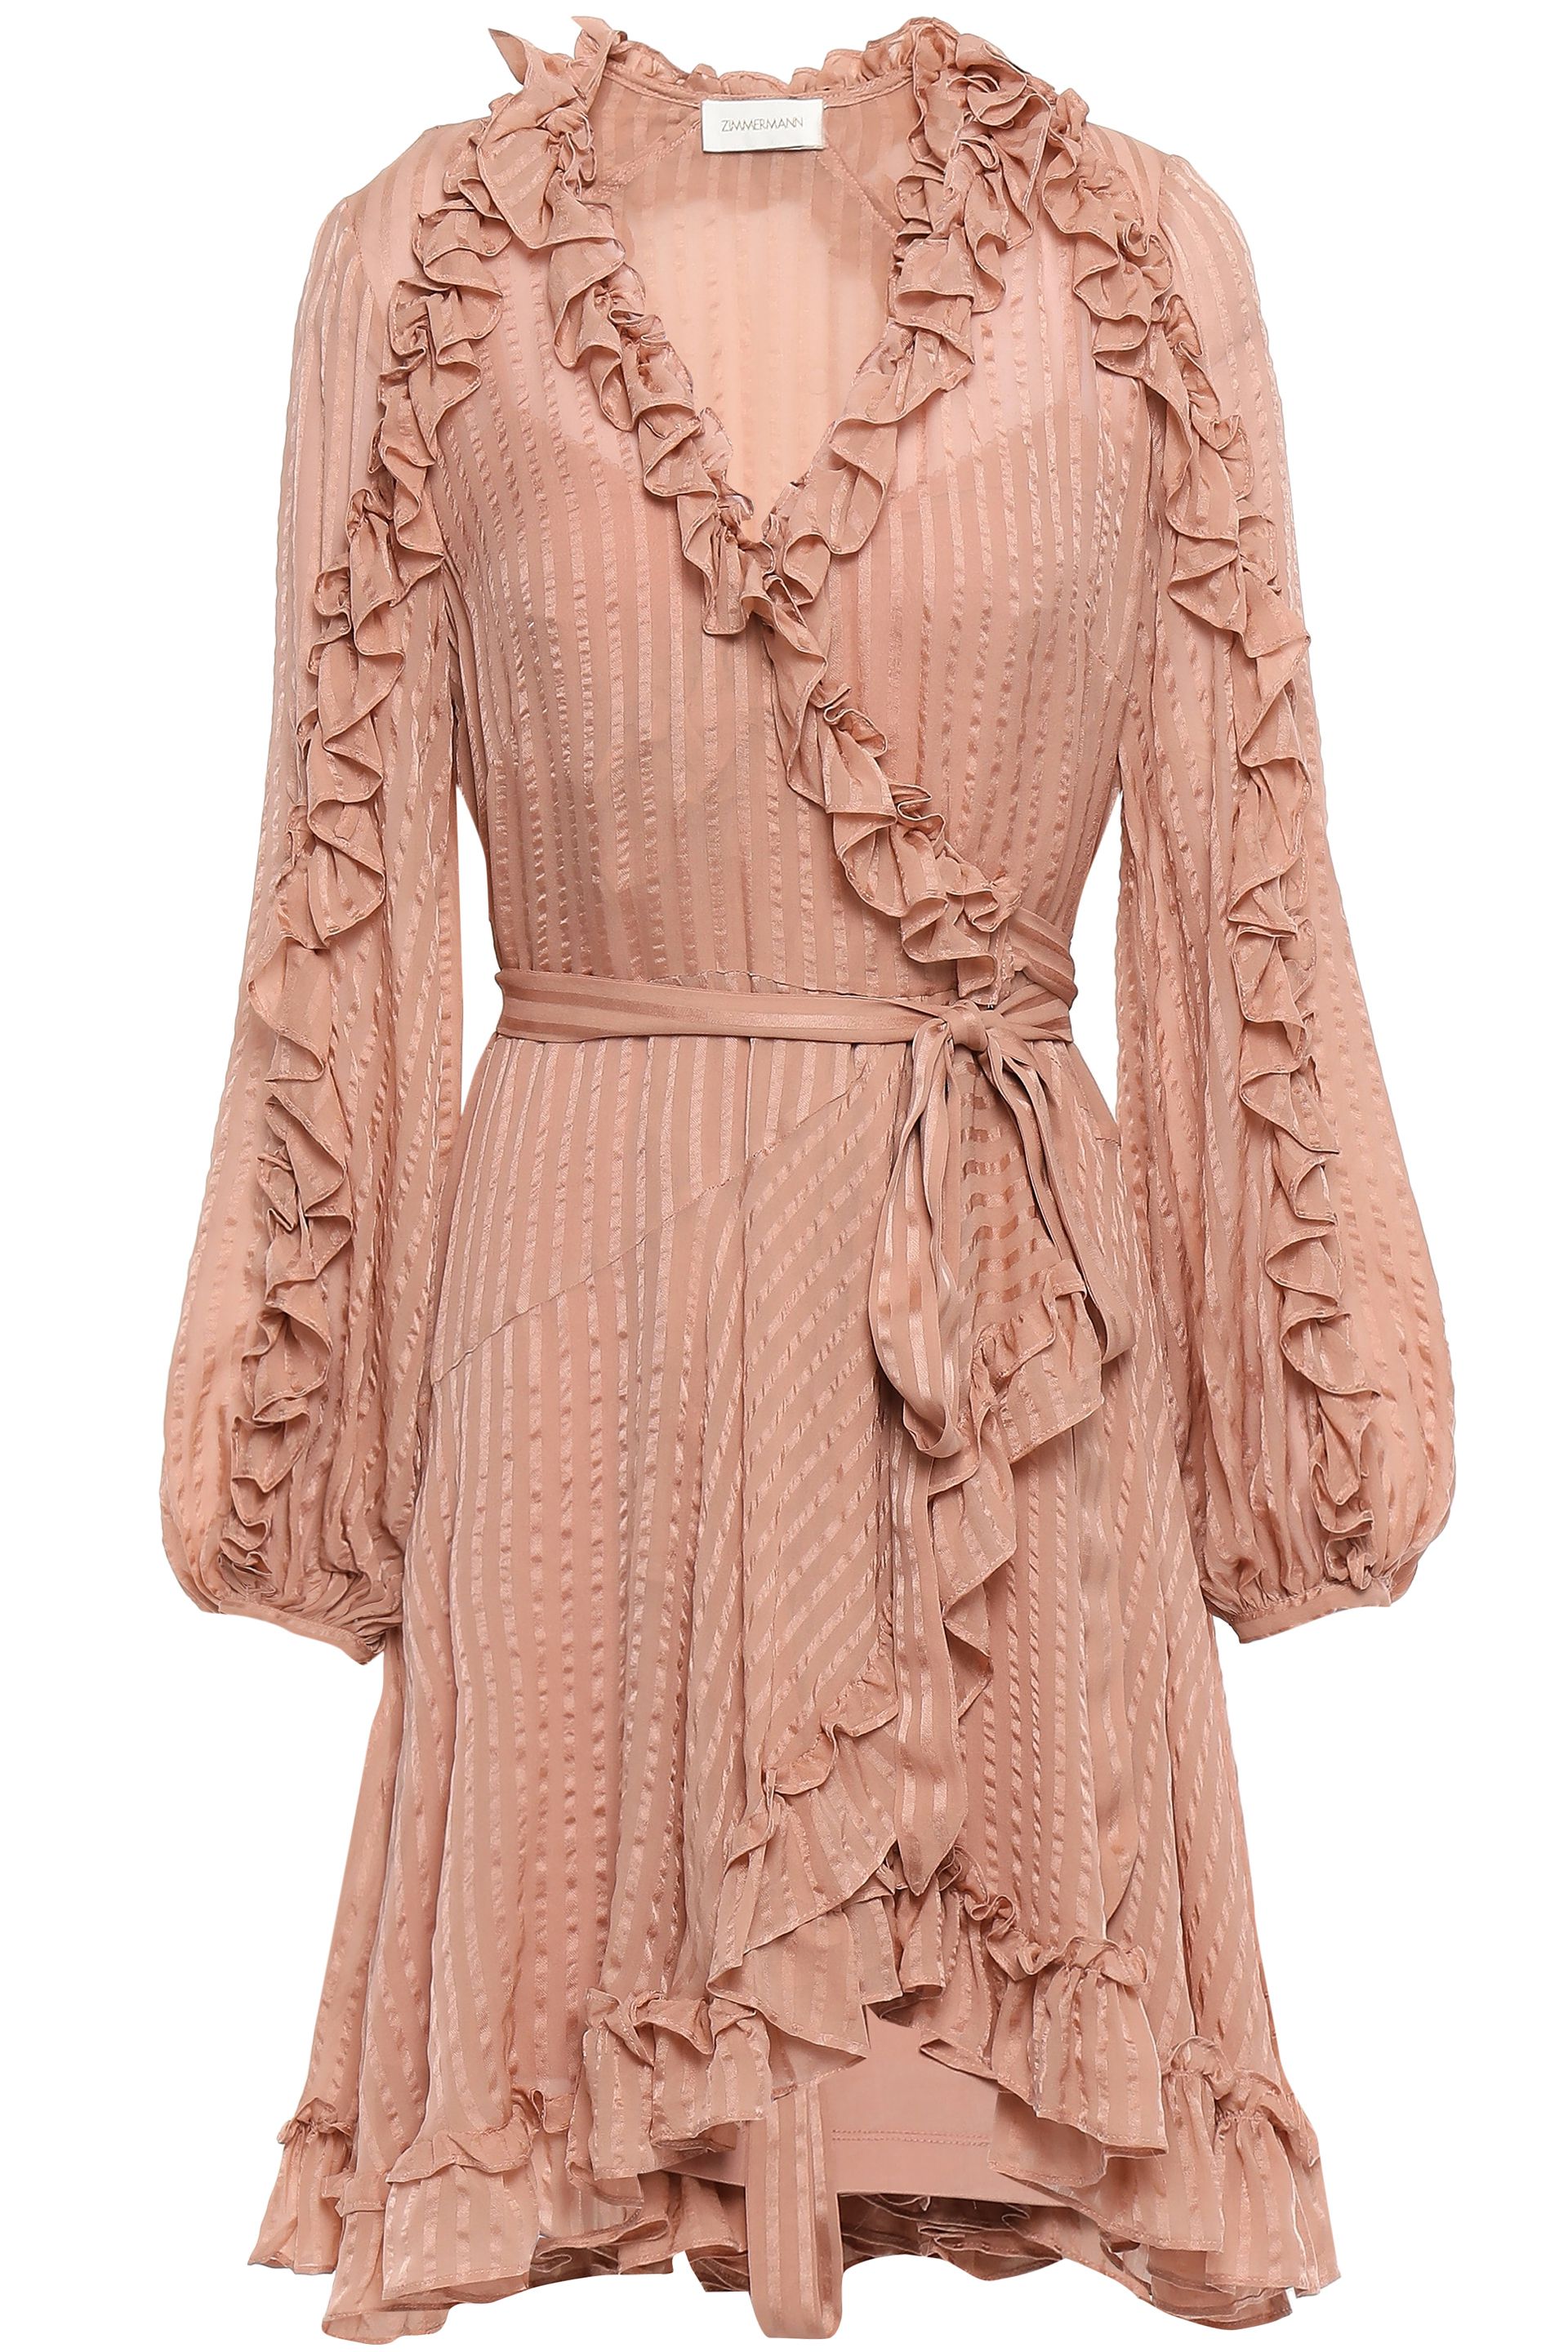 Zimmermann Dresses | Sale Up To 70% Off At THE OUTNET